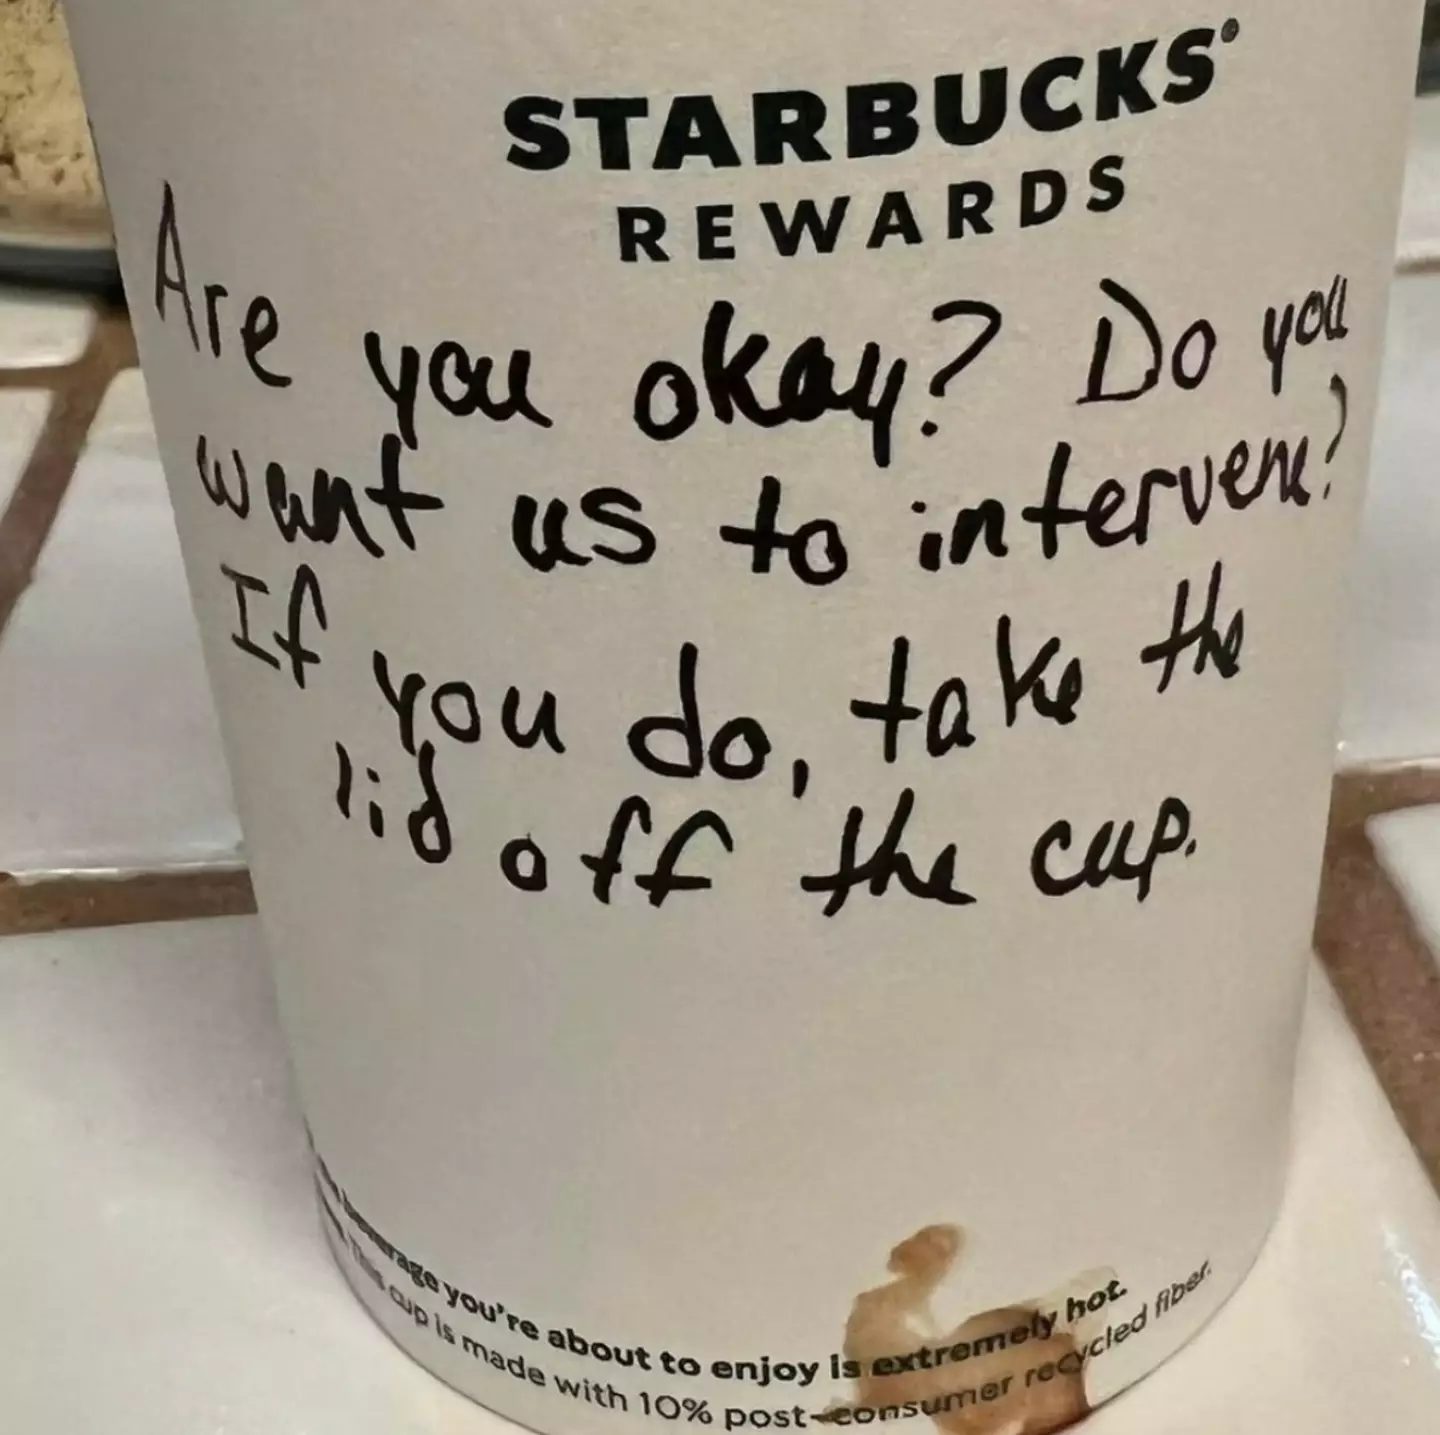 The cup had a message written on it.